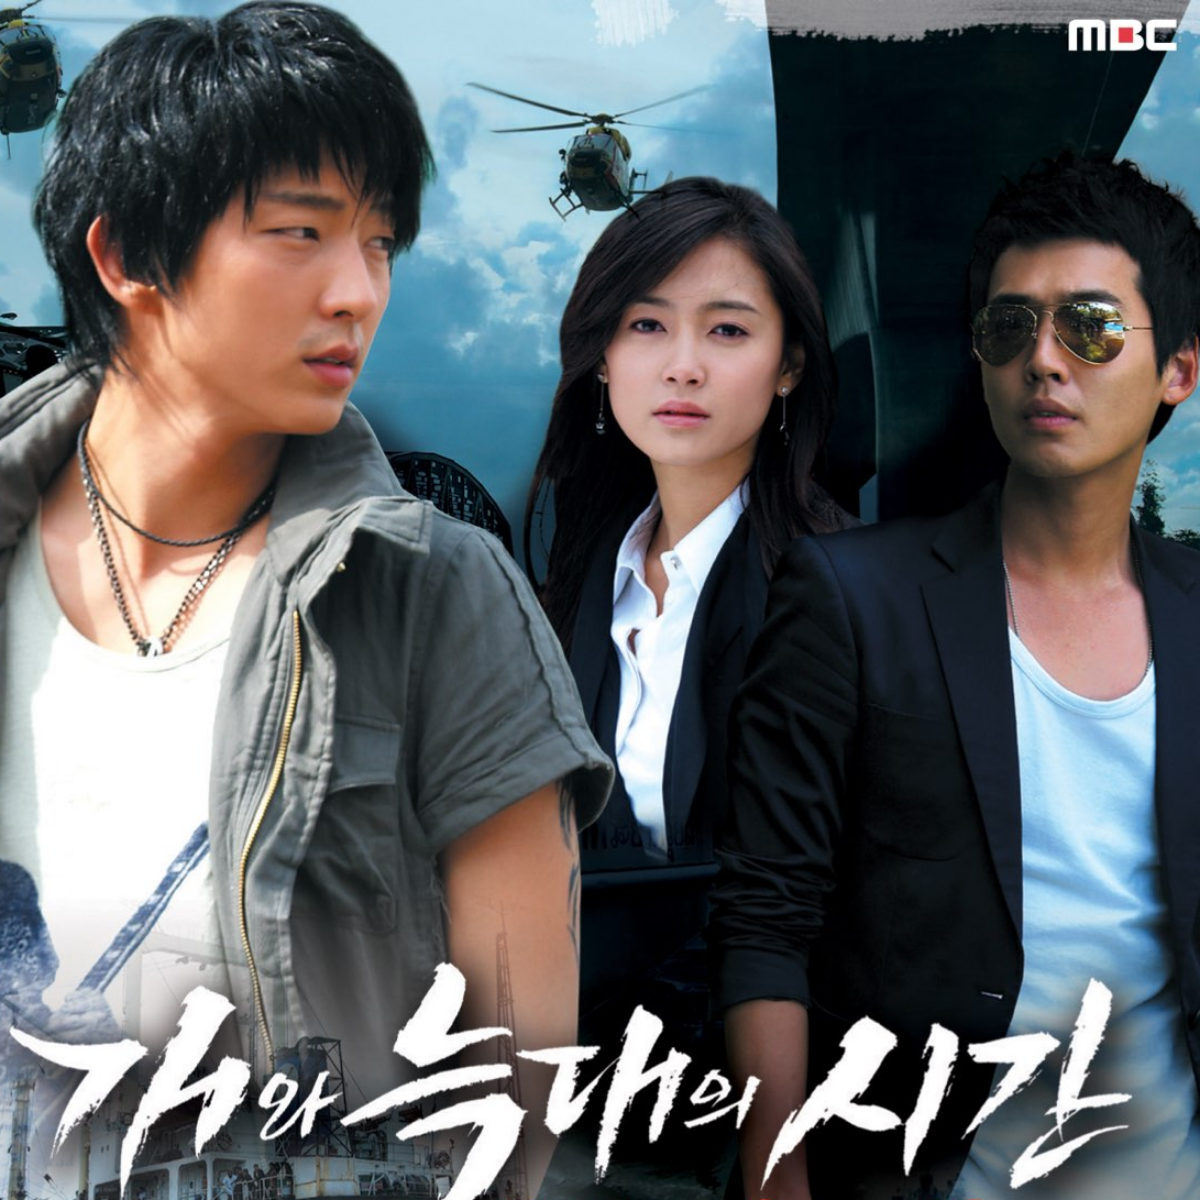 time between wolf and dog kdrama 11